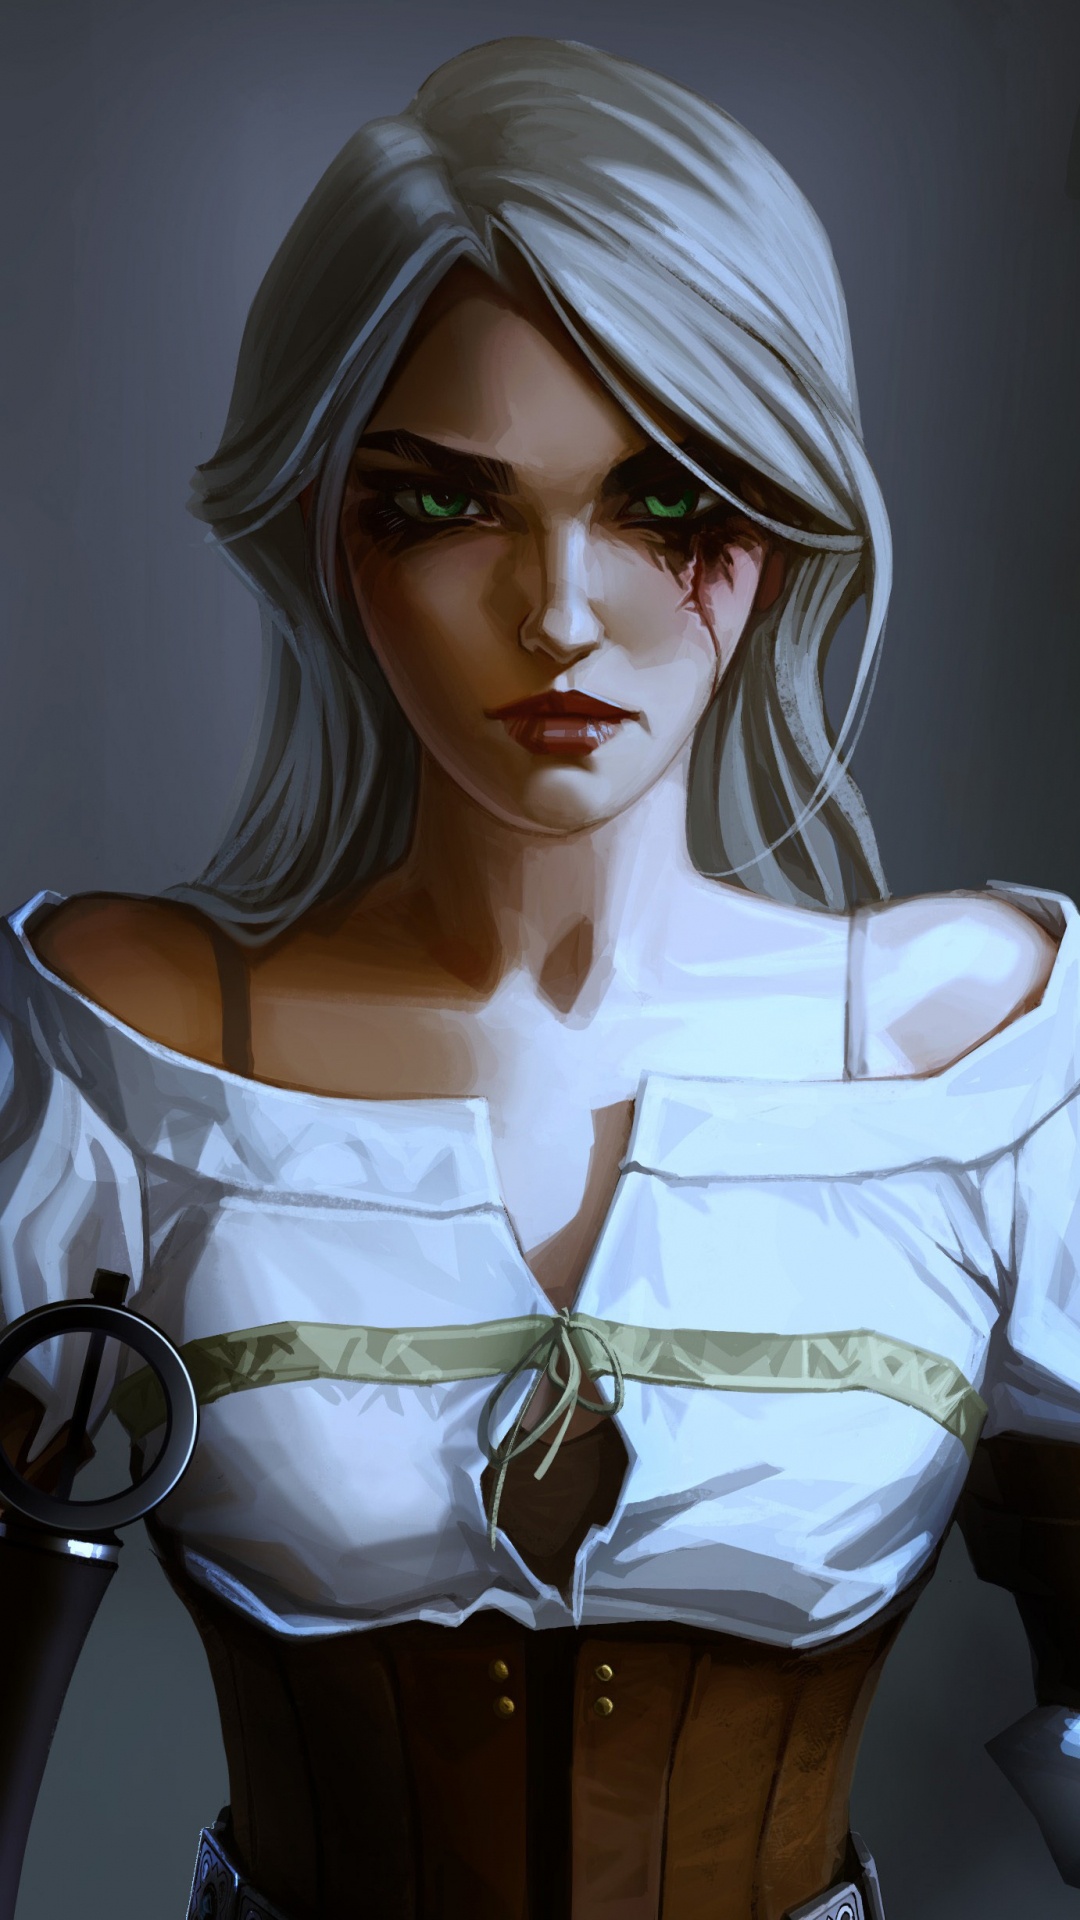 The Witcher 3 Wild Hunt, Ciri, Geralt of Rivia, The Witcher, Yennefer. Wallpaper in 1080x1920 Resolution